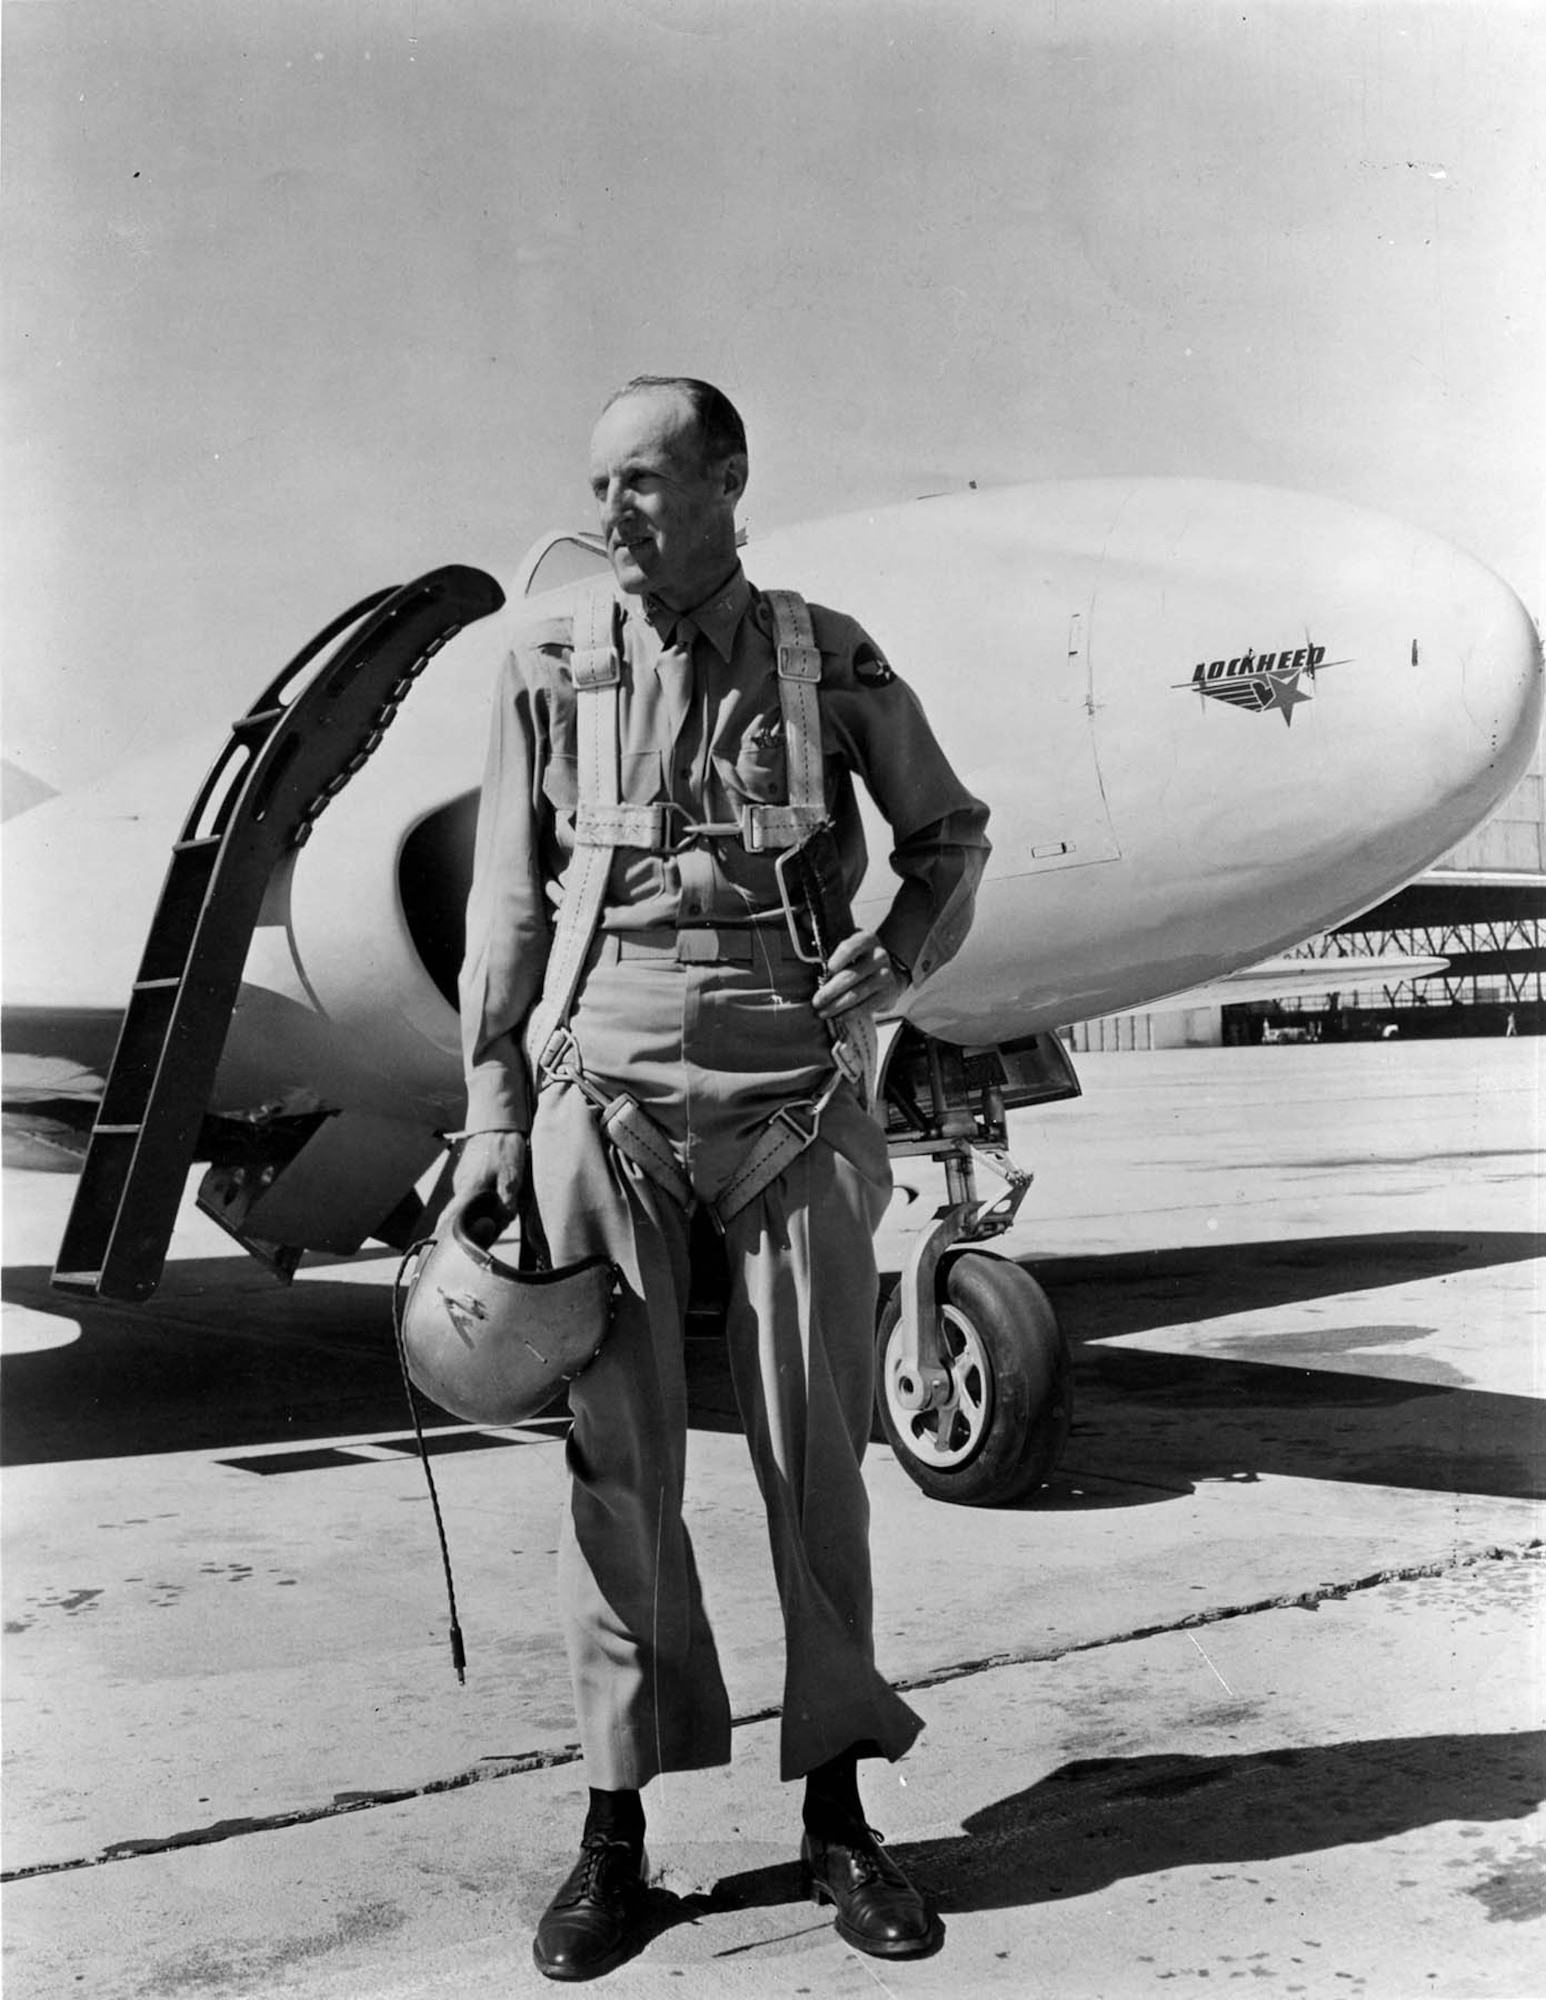 Col. Albert Boyd in front of the P-80R. On June 19, 1947, at Muroc Army Air Field (now Edwards Air Force Base), California, Boyd flew this P-80R to a new world's speed record of 623.753 mph, returning the record to the United States after nearly 24 years. (U.S. Air Force photo)